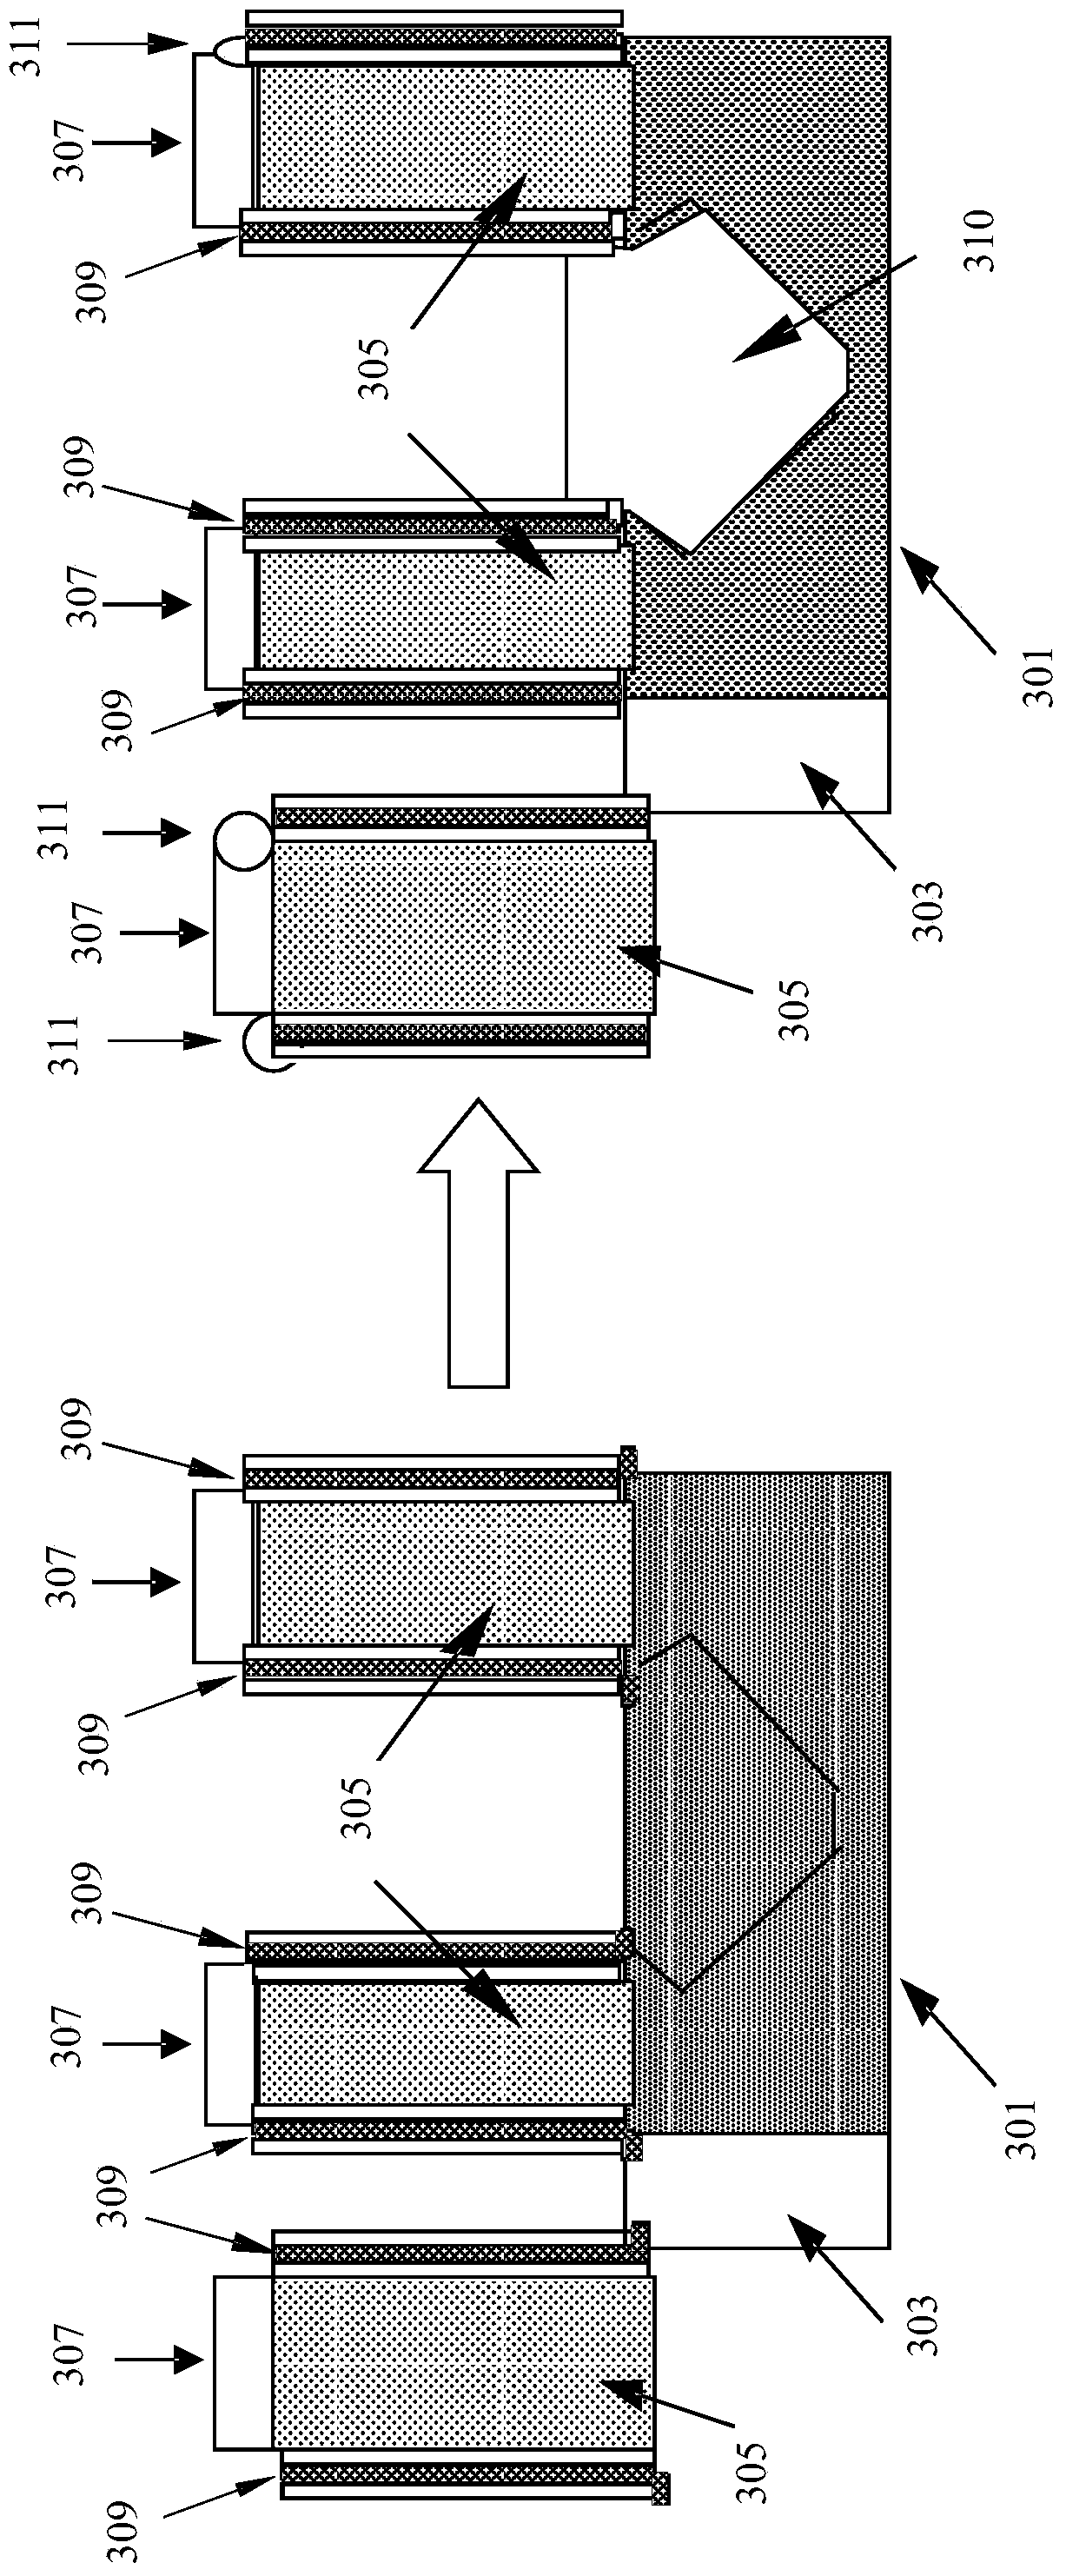 Method for forming embedded silicon germanium